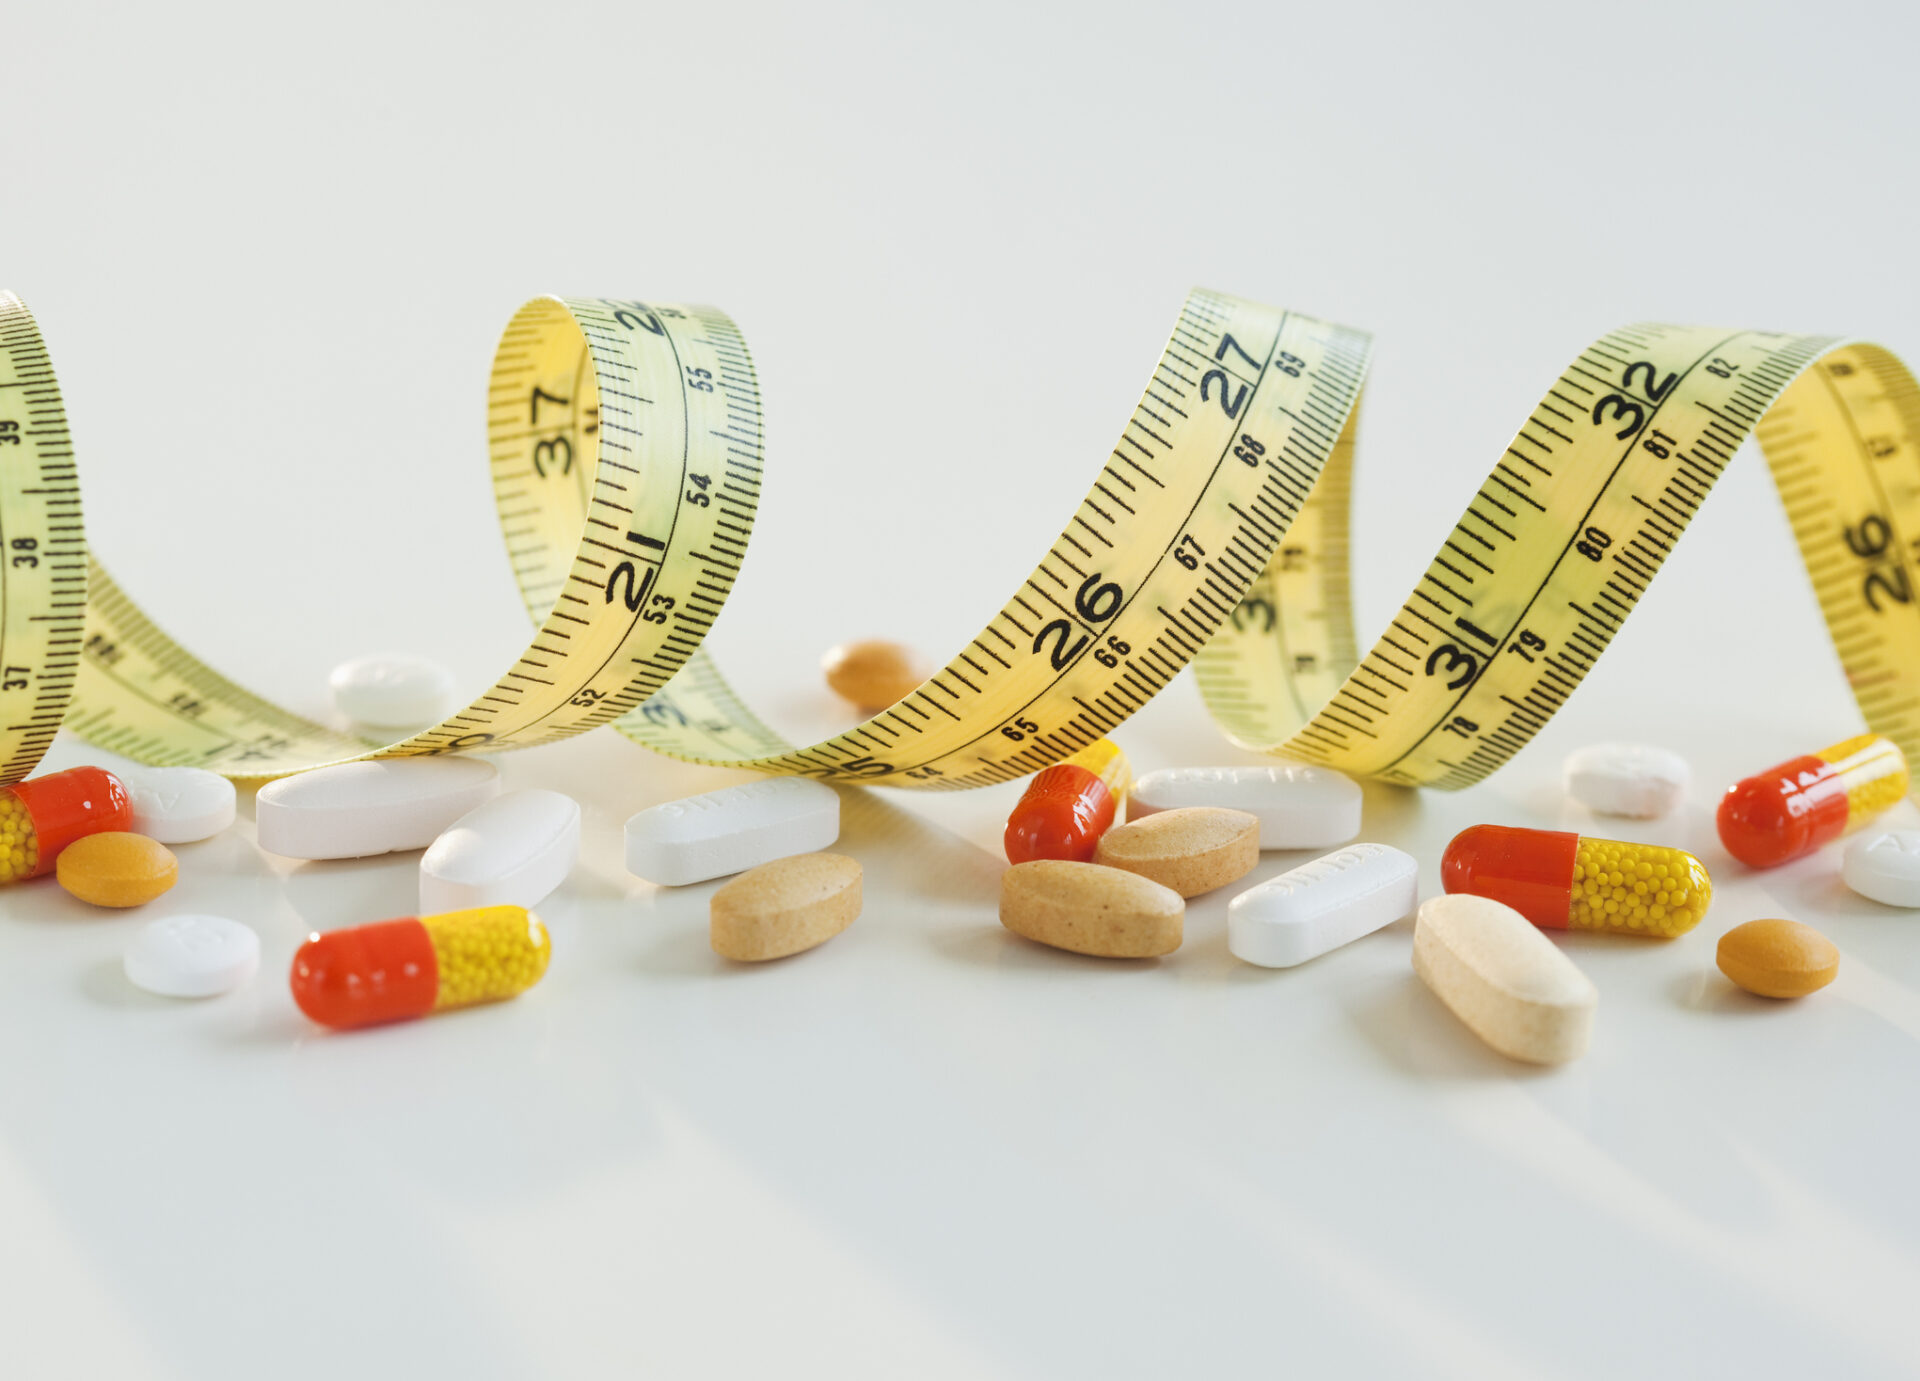 cancer, weight loss drugs, study